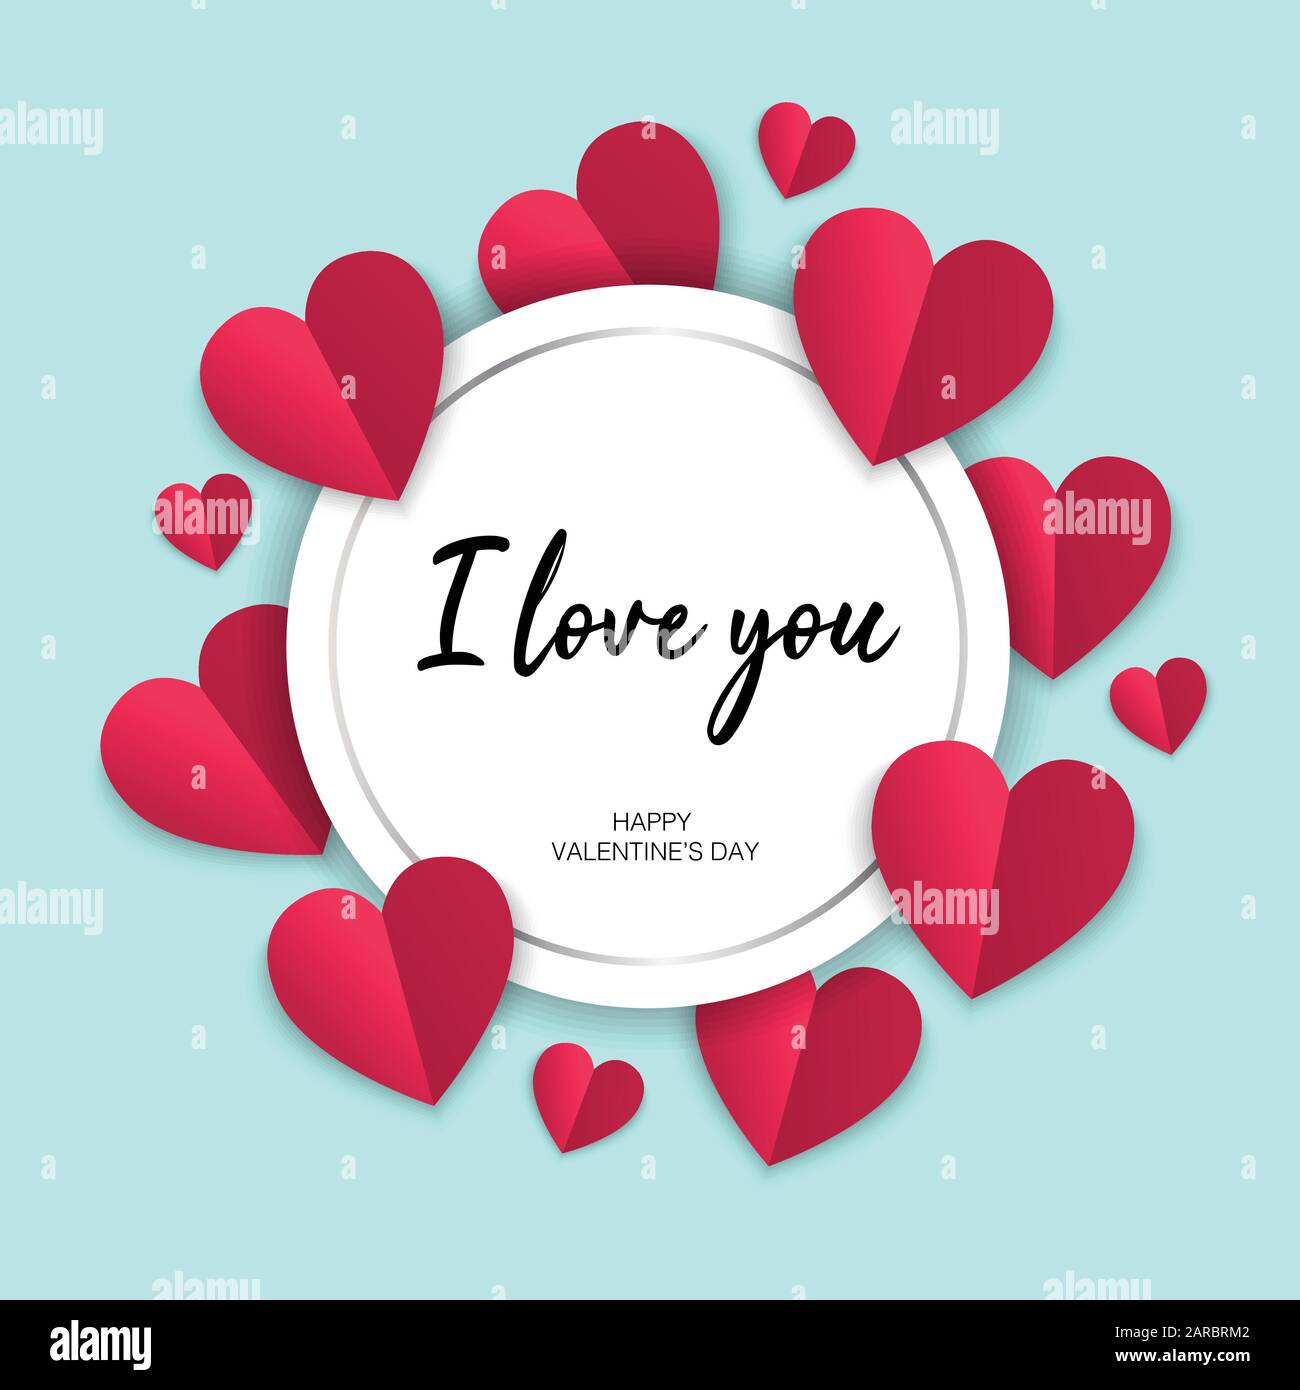 I love you. Happy Valentines Day poster greeting card. Vector ...